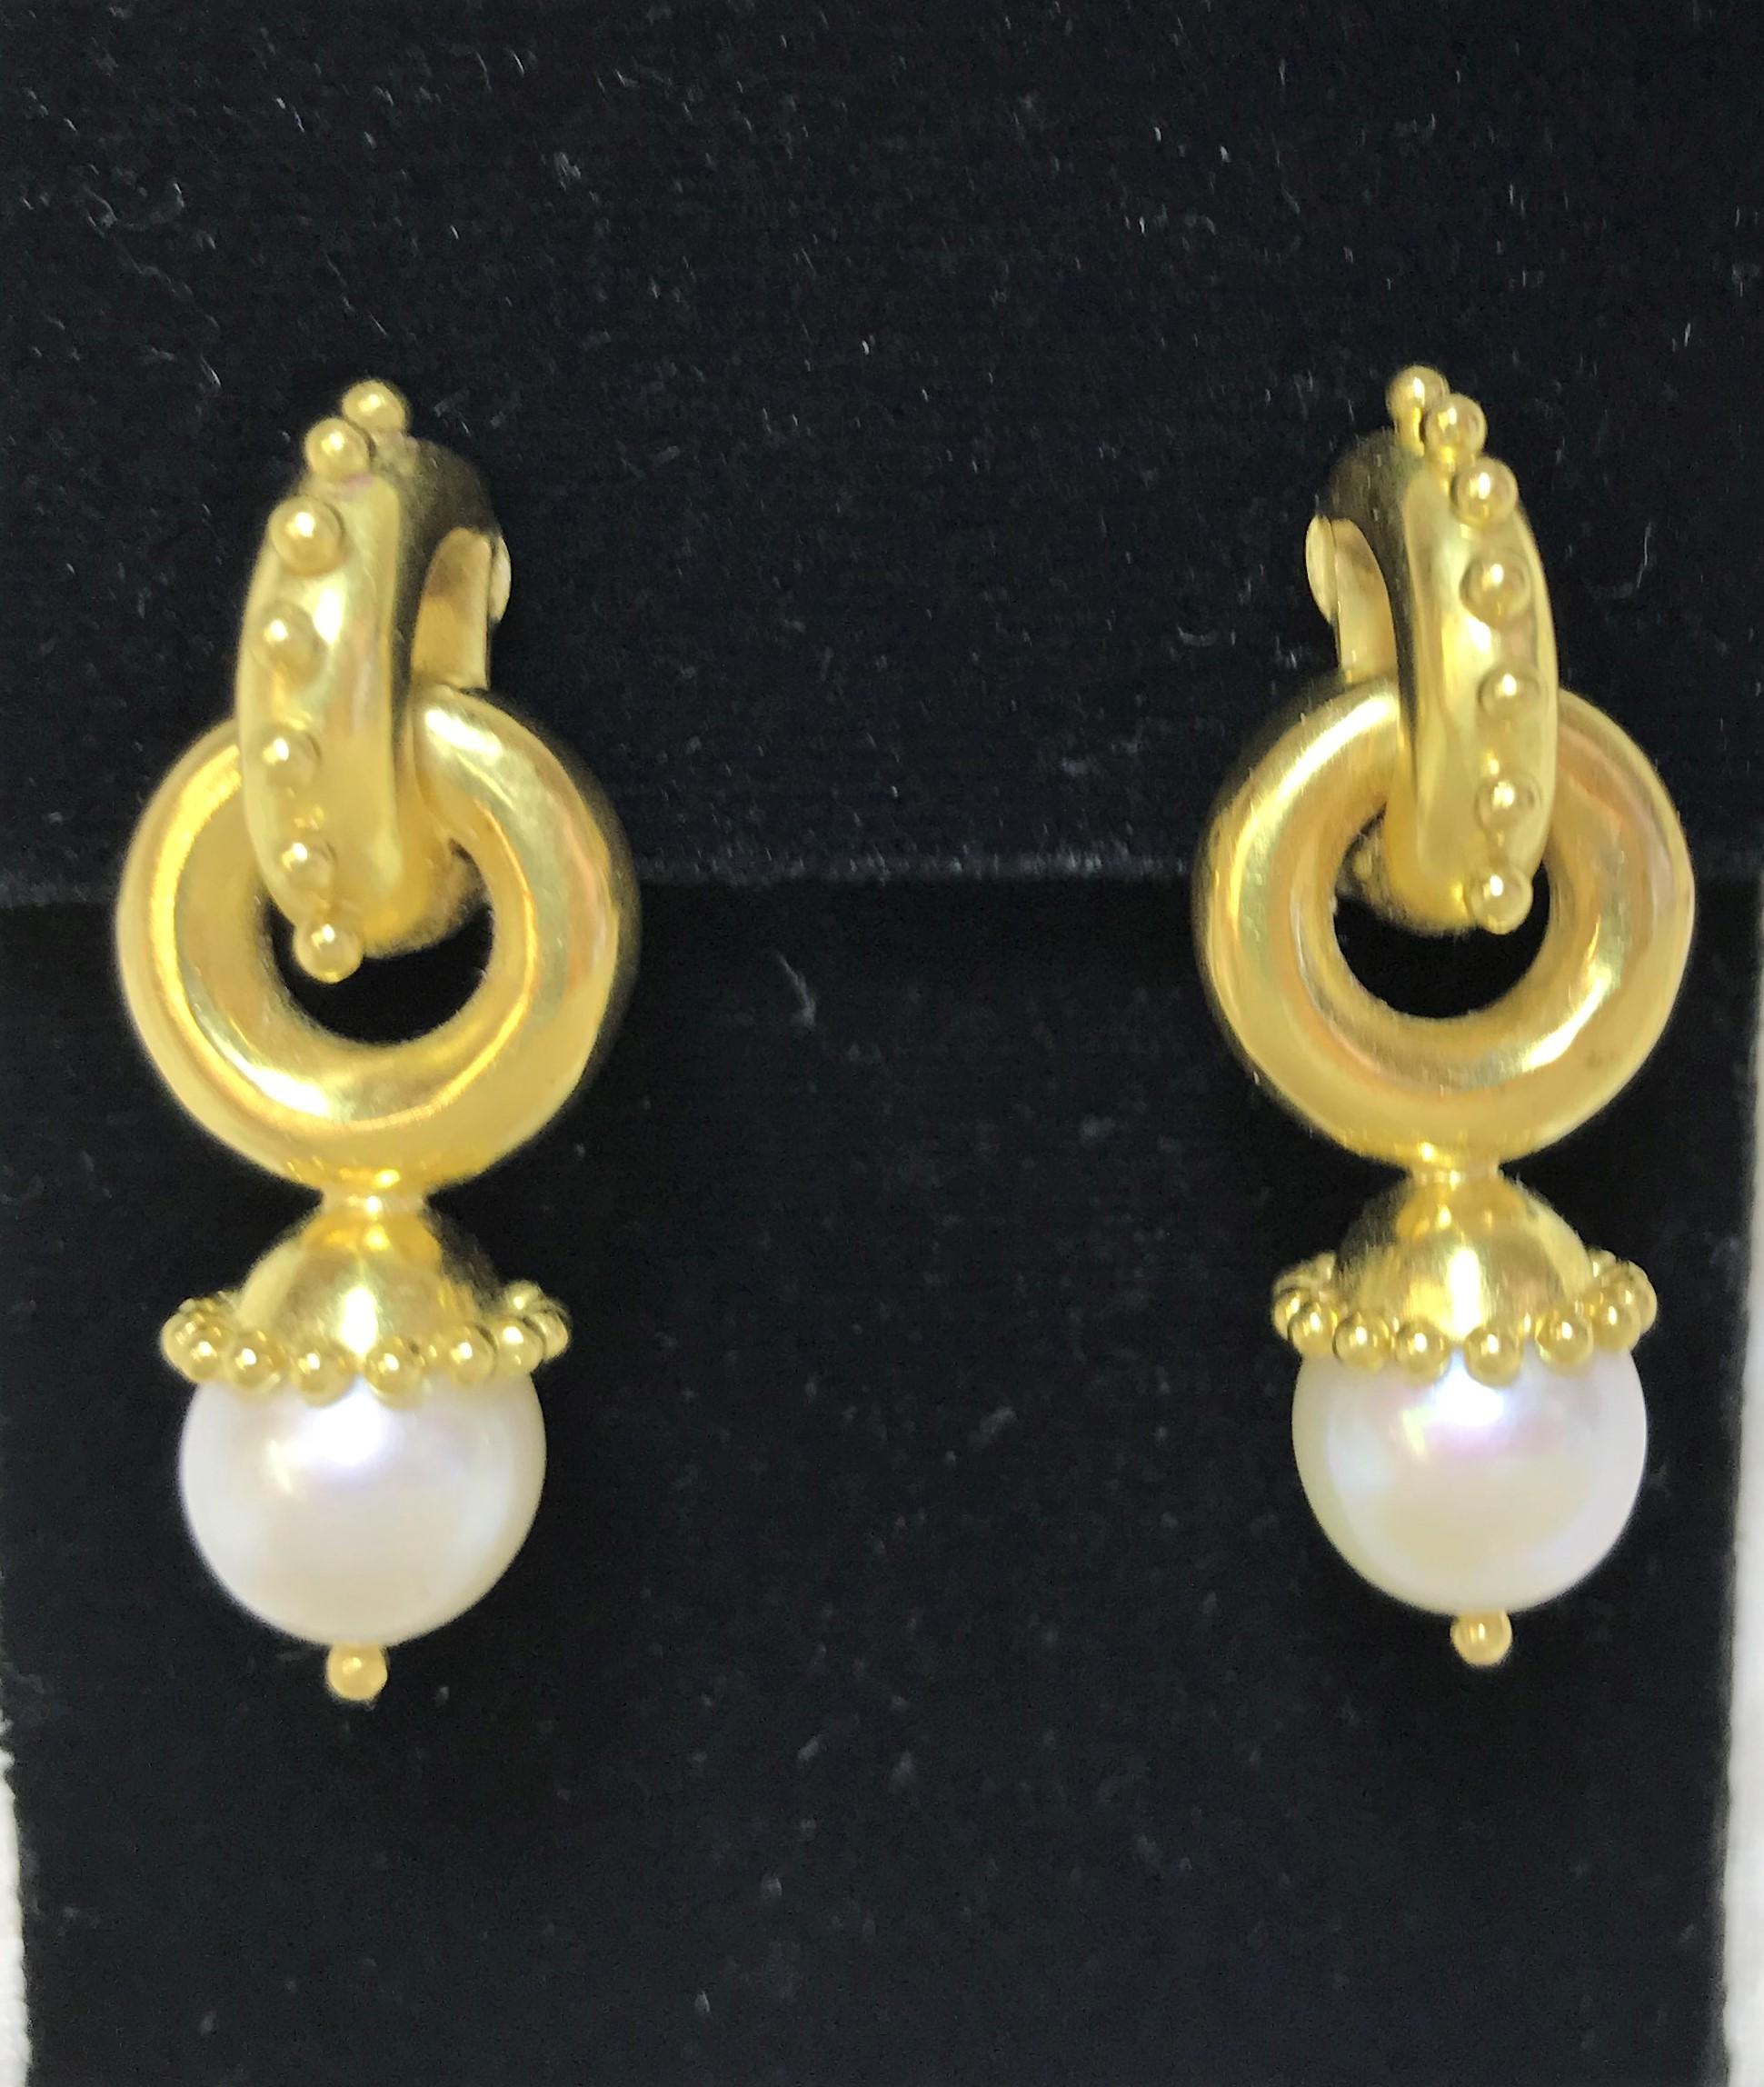 These earrings are a classic must have!
Elizabeth Locke 19 karat yellow gold
White Pearl Cheerio style number ER14728
Pearl is approximately 9mm
19 karat yellow gold hammered finish with granulation with gold dots
Omega clip back with collapsible